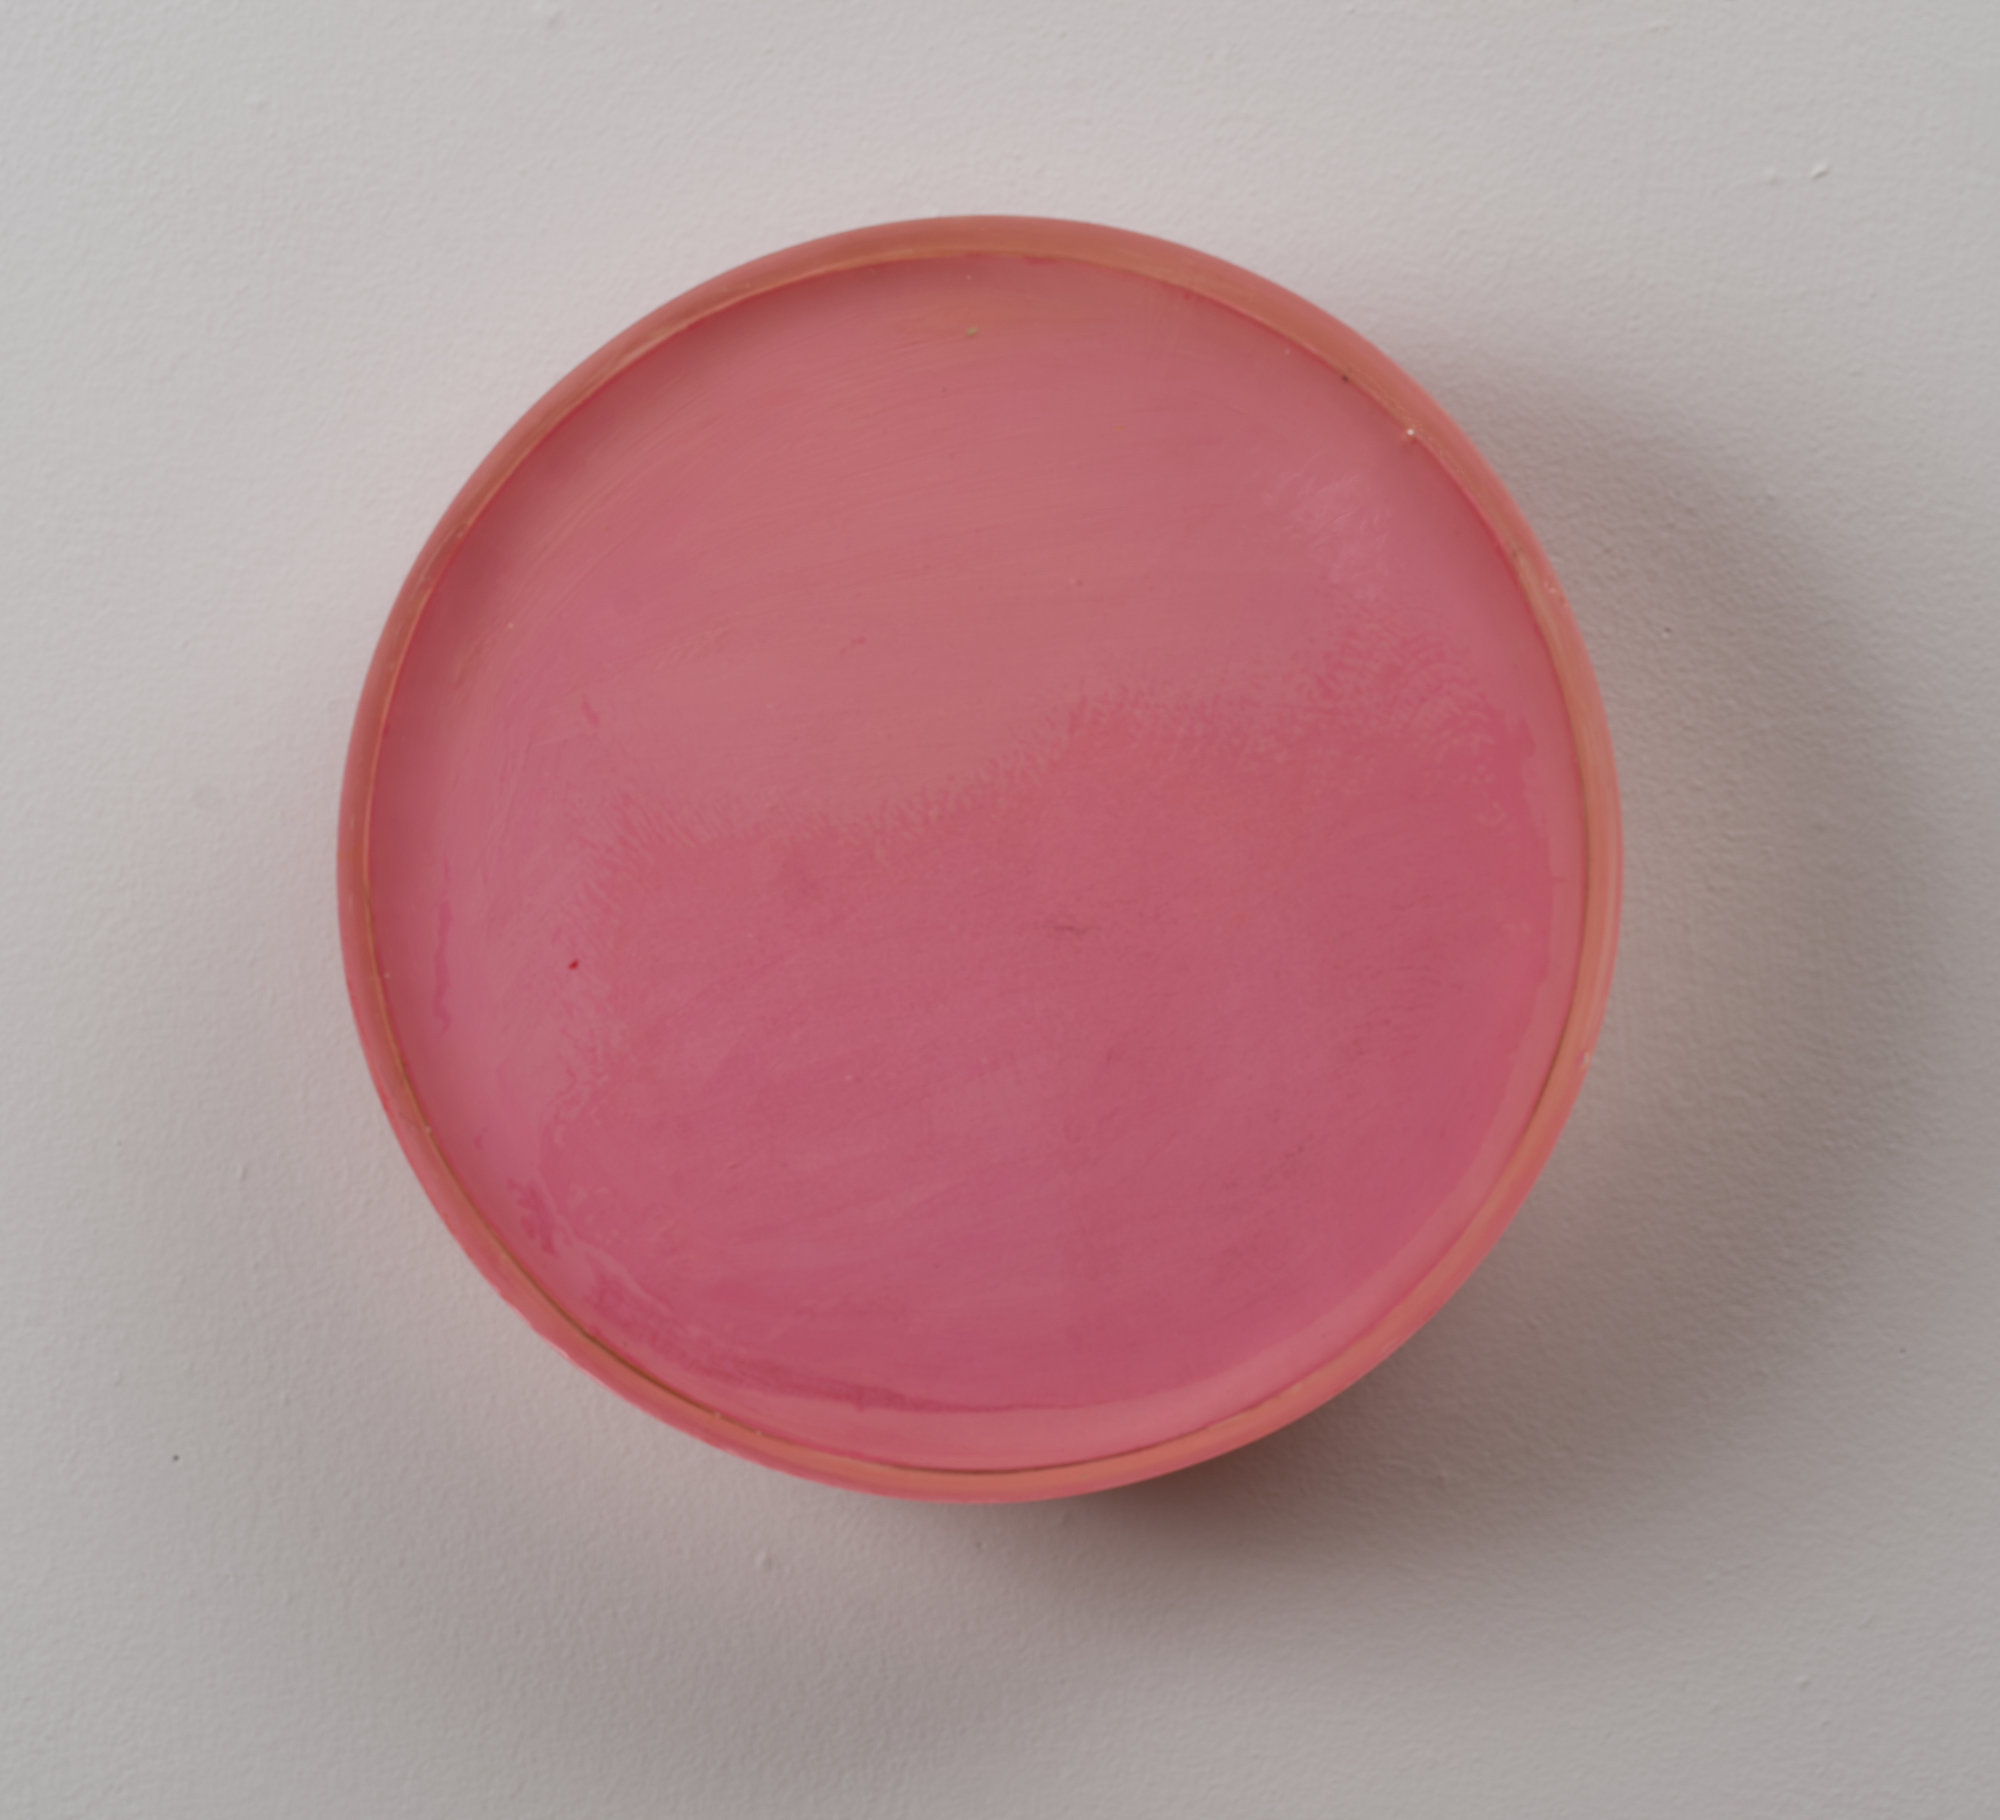 Resin Work titled "Pink" By Ana Rendich Les Yeux du Monde